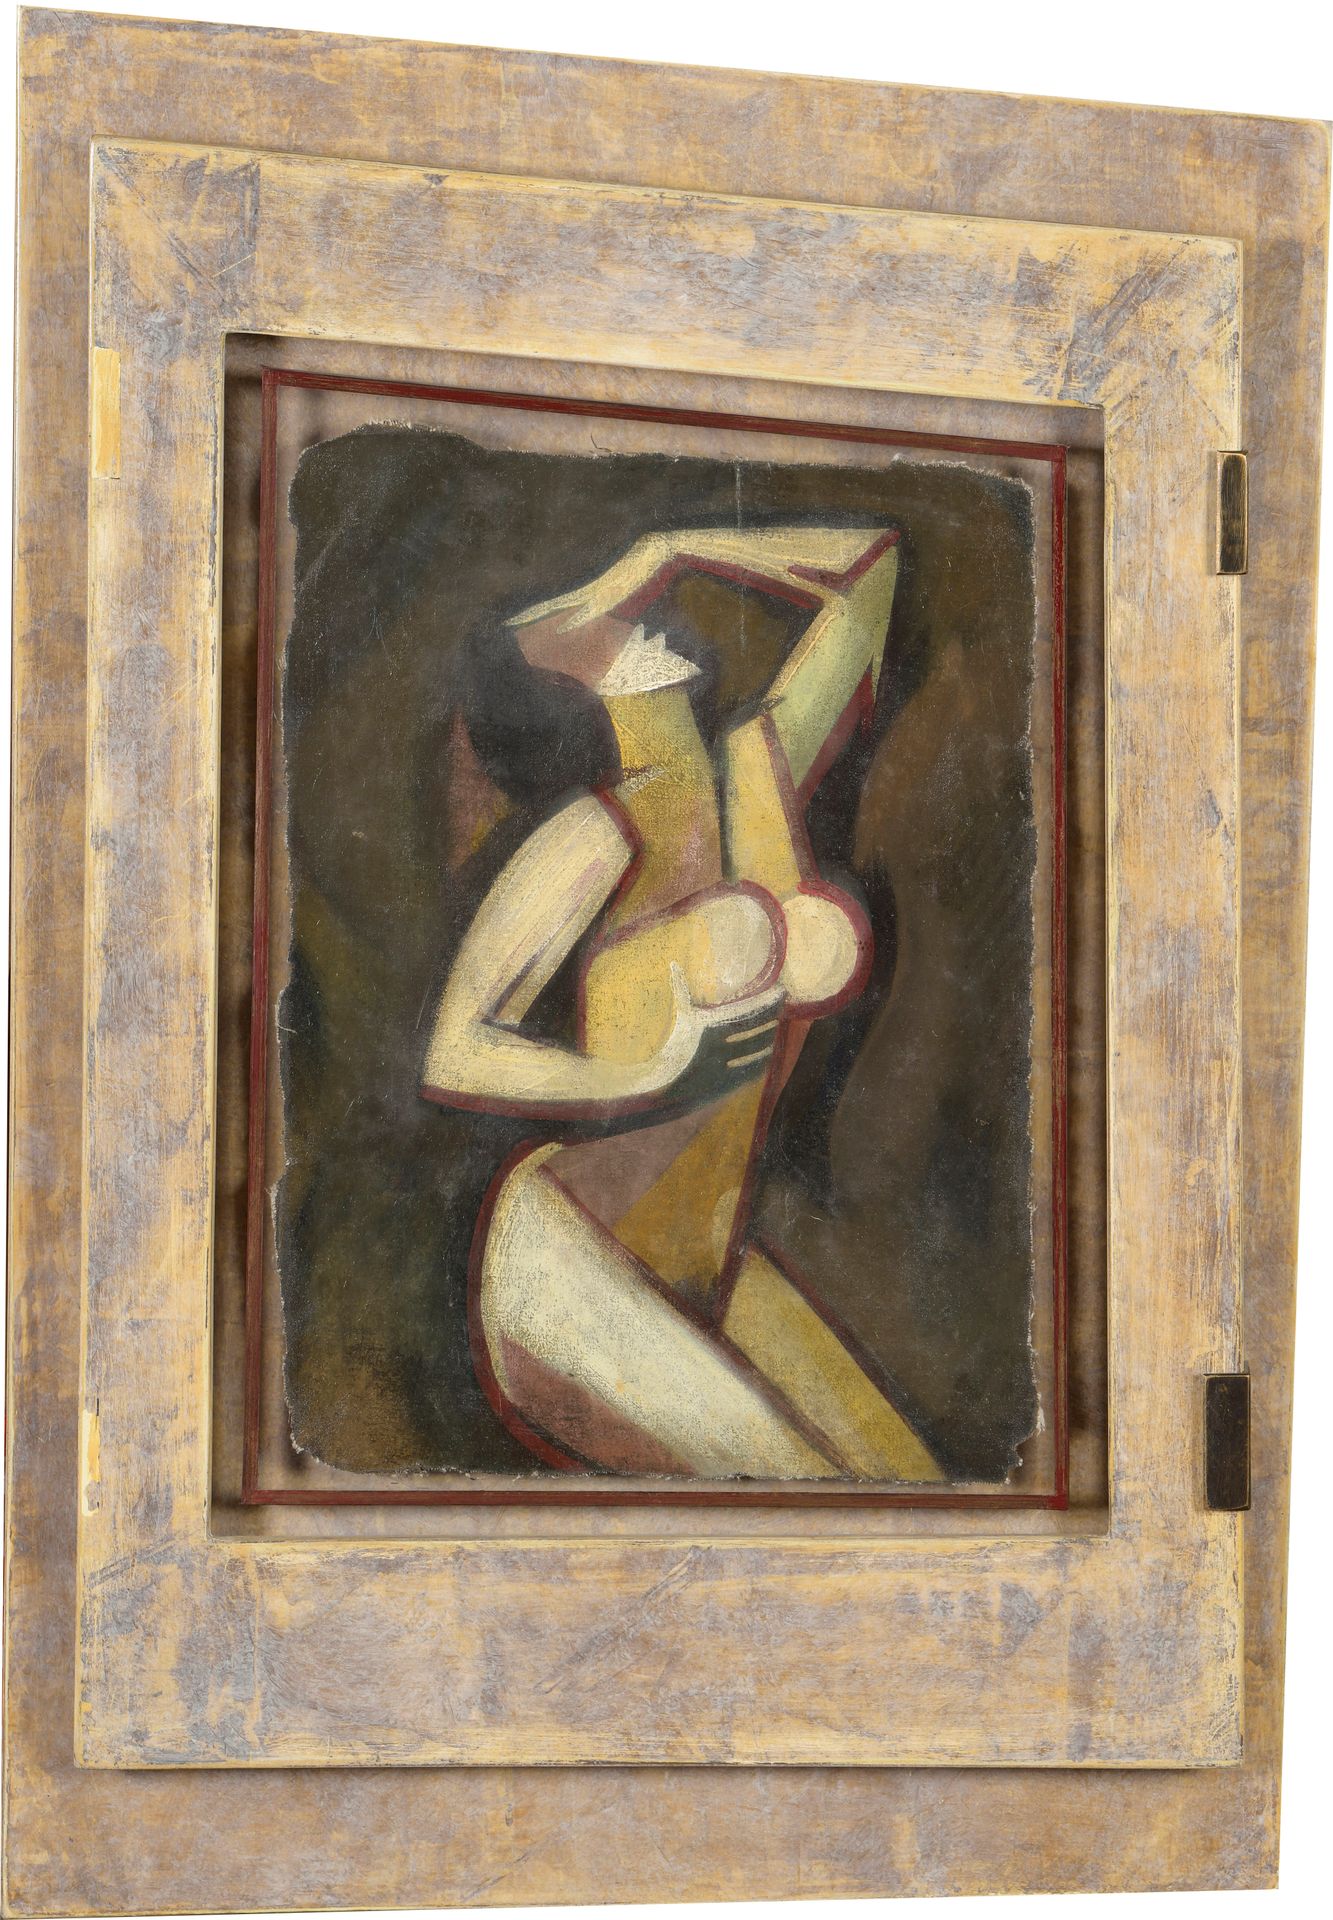 Null School of the Xth century

Cubist nude

Oil on canvas (without frame). Prob&hellip;